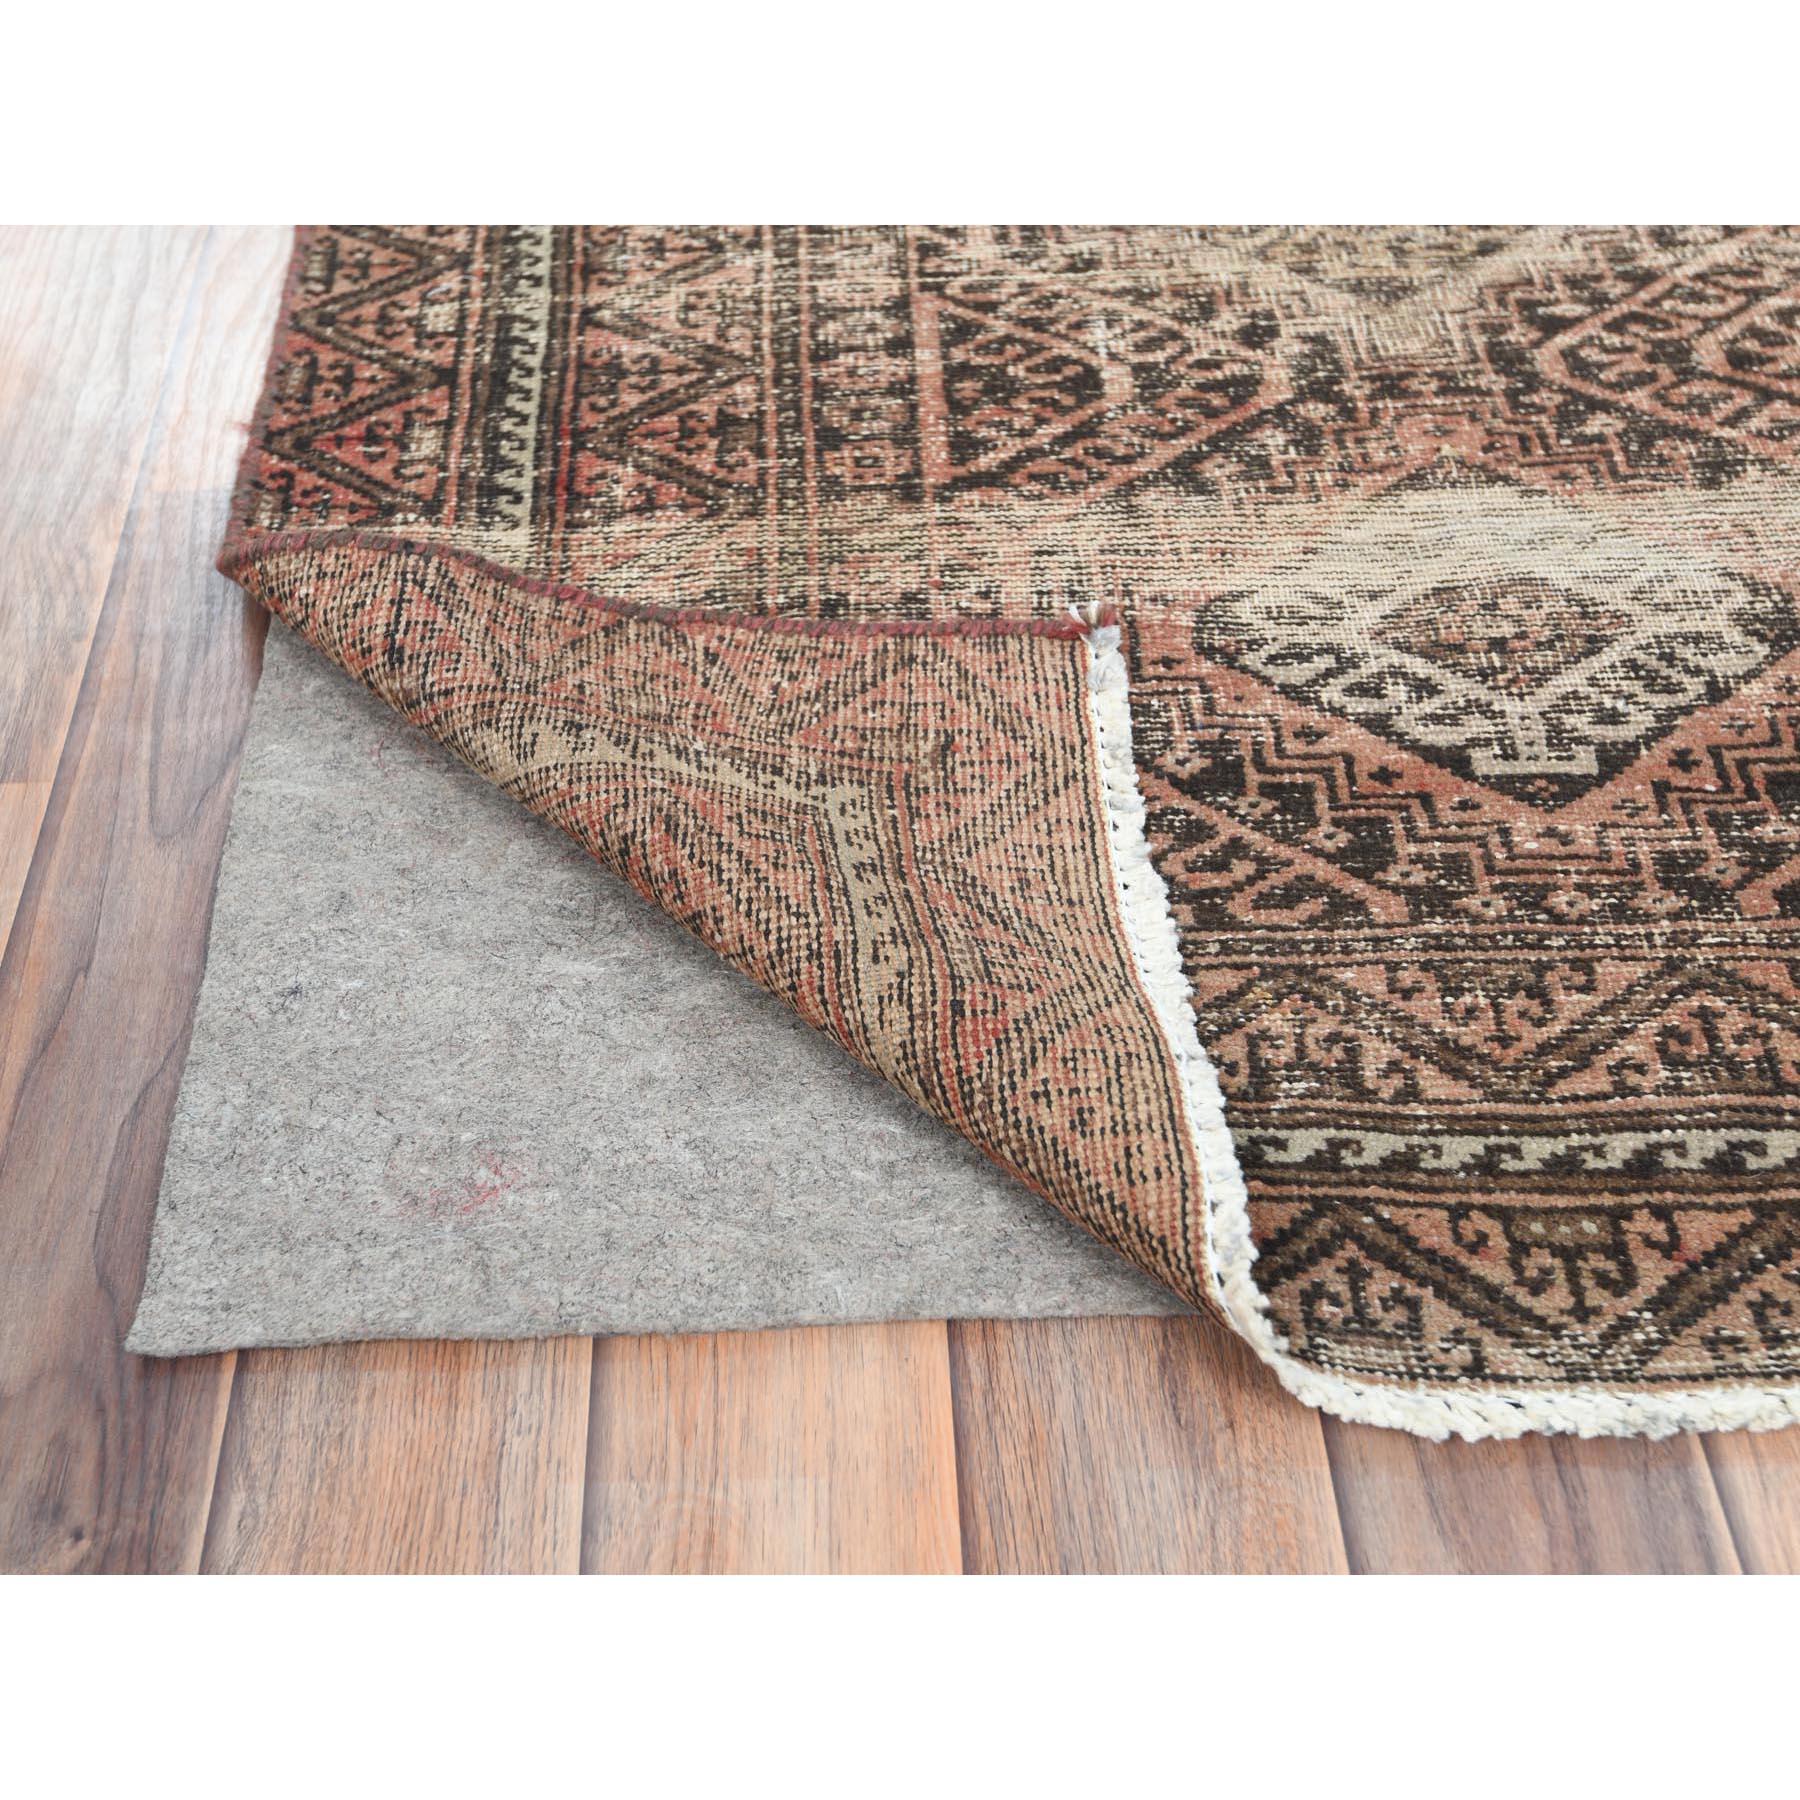 Medieval Tan Color Soft Wool Hand Knotted Vintage Persian Baluch Worn Down Runner Rug